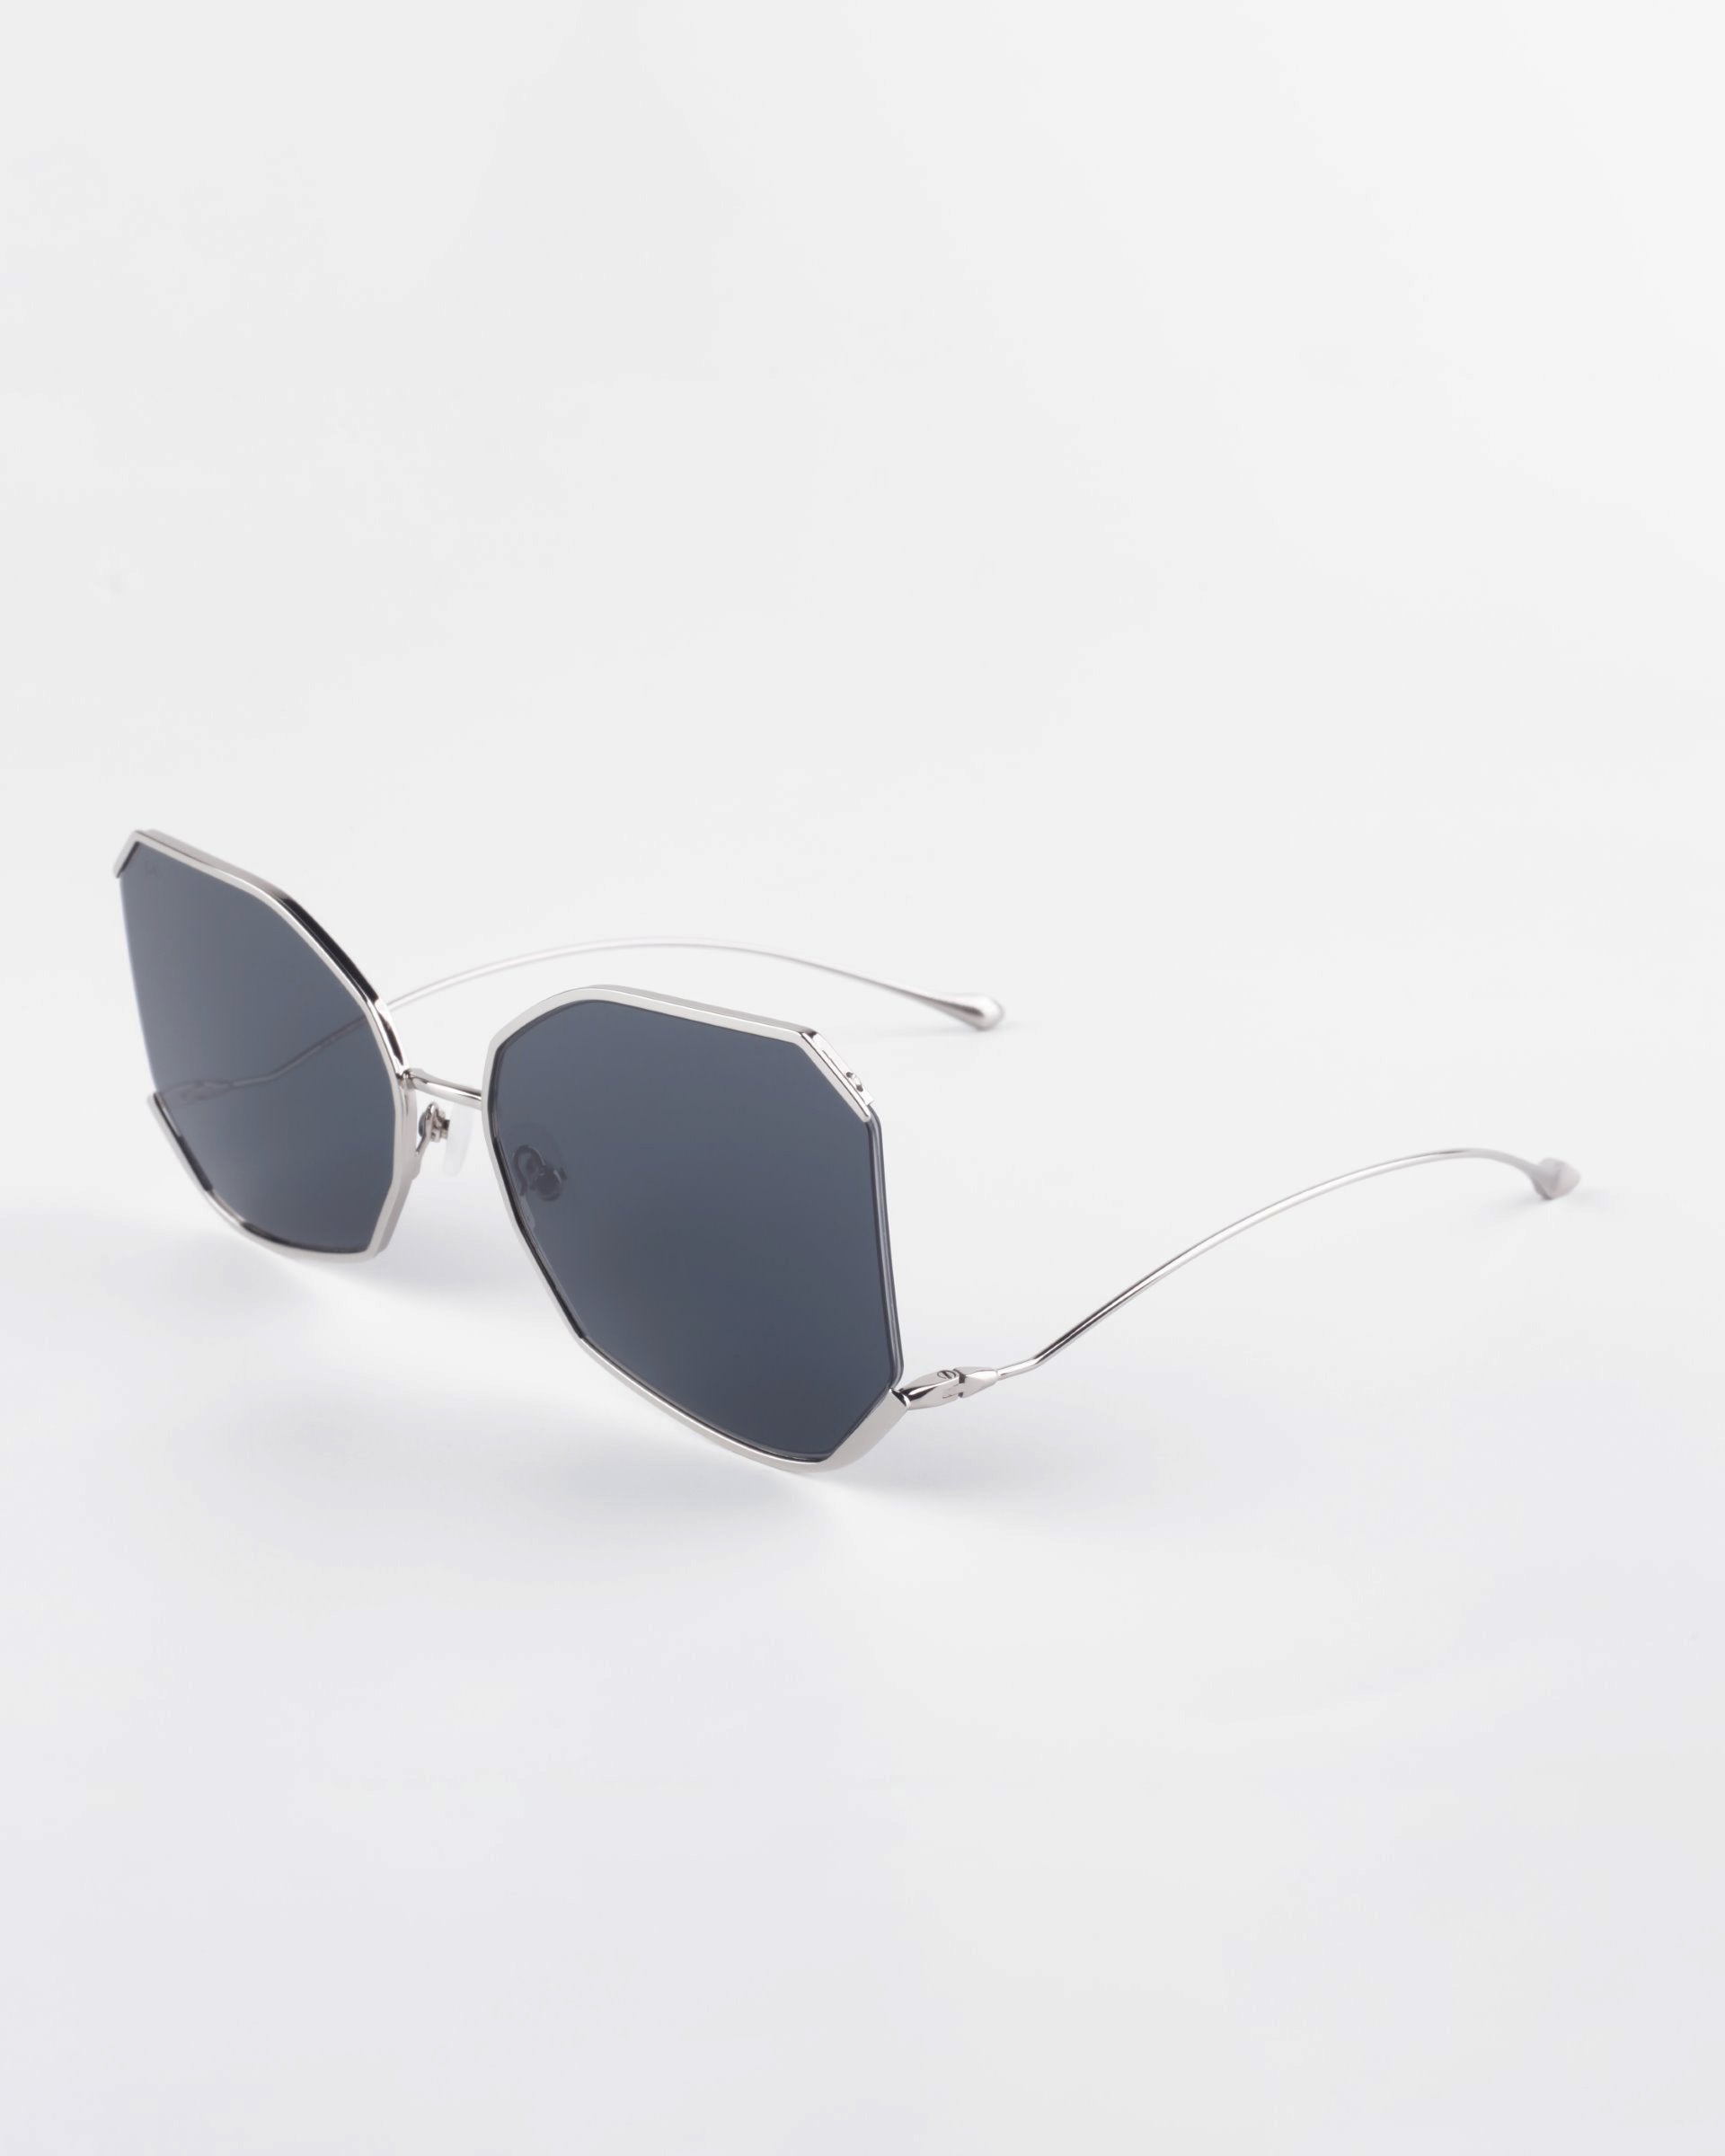 A pair of modern, silver-framed sunglasses with unique angular, dark-tinted lenses is displayed against a plain white background. The gold-plated stainless steel design features sleek, thin arms adding to the minimalist aesthetic and 100% UVA & UVB protection. The product name is Painter from For Art's Sake®.